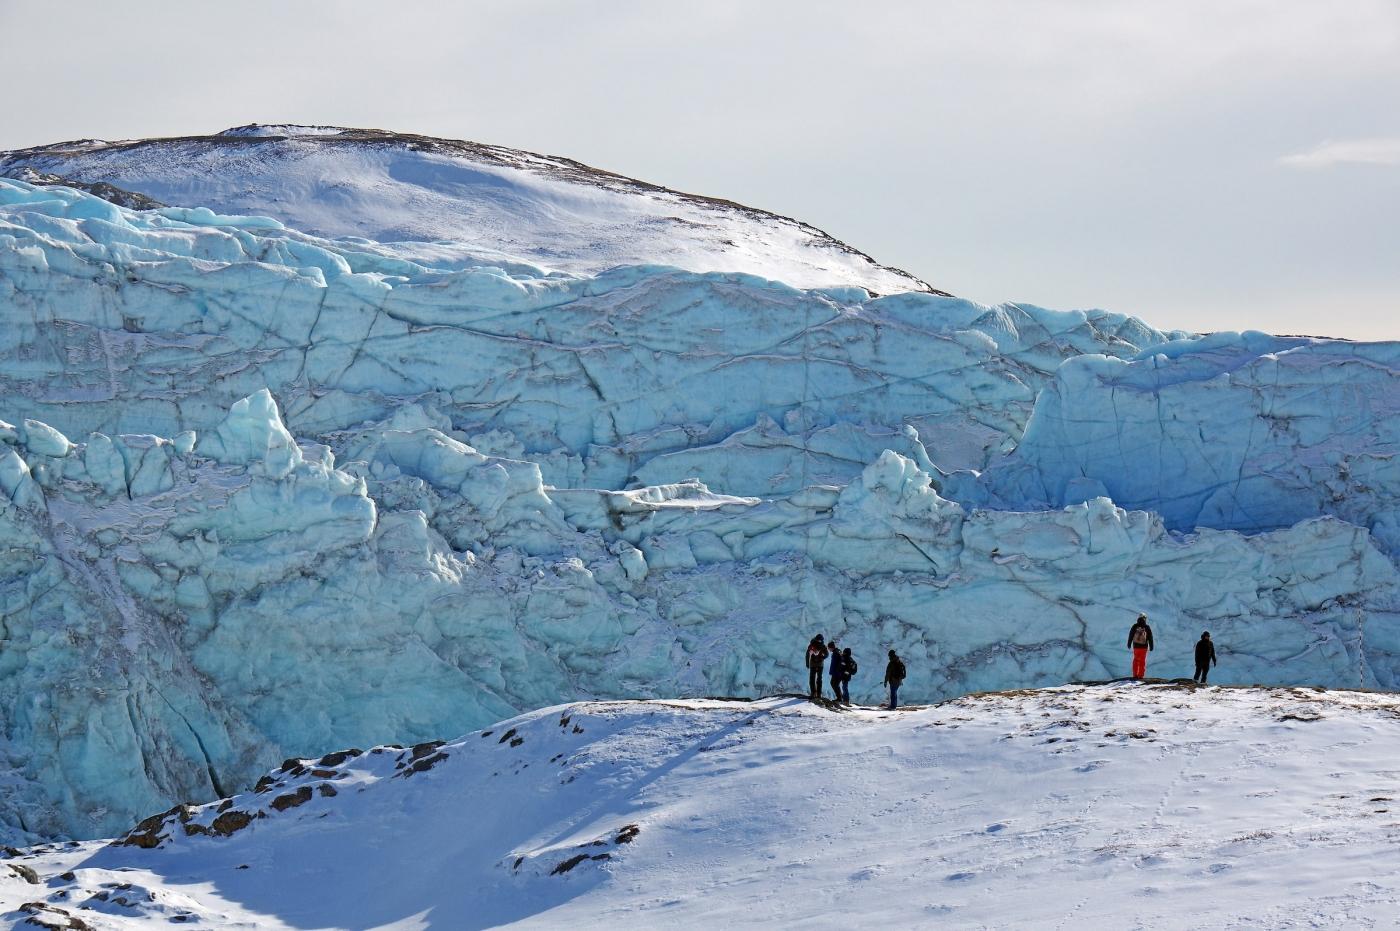 Tourists admiring the front face of Russell Glacier, close to Kangerlussuaq, on a clear winter's day. Photo by Reinhard Pantke - Visit Greenland